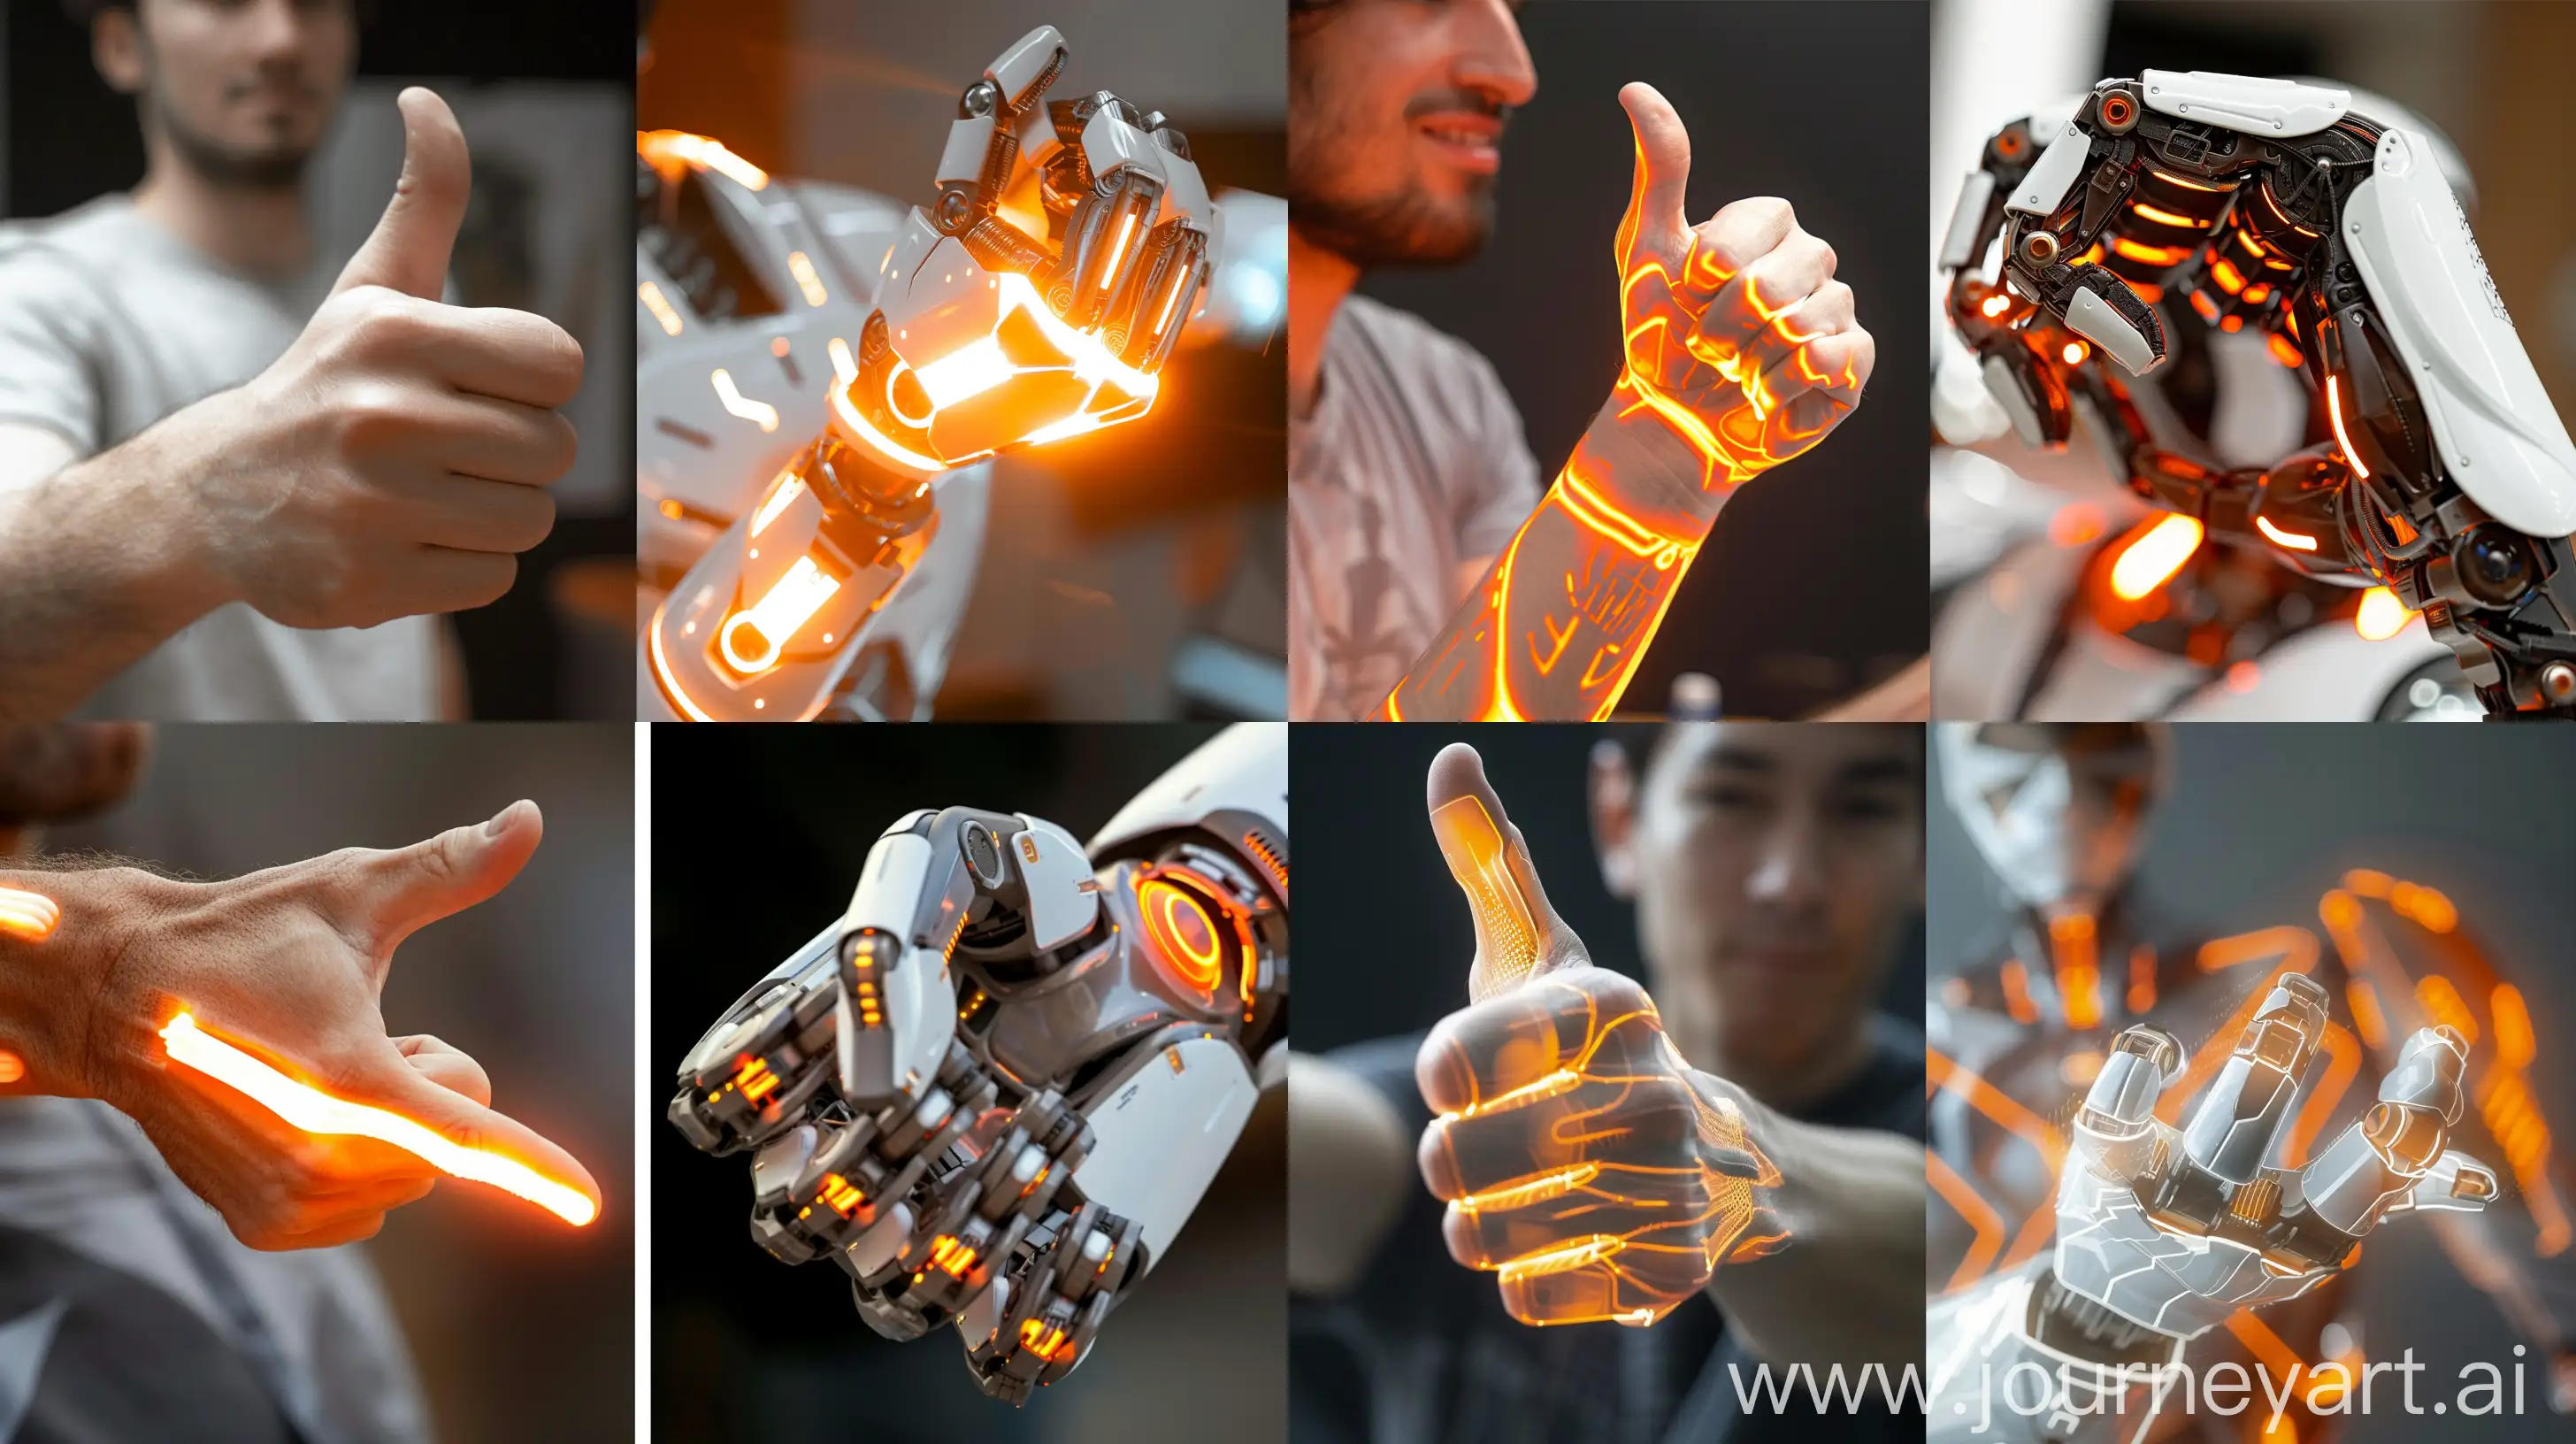 Like-Gesture-Comparison-Human-Hand-and-Robot-Hand-in-Glowing-Orange-and-White